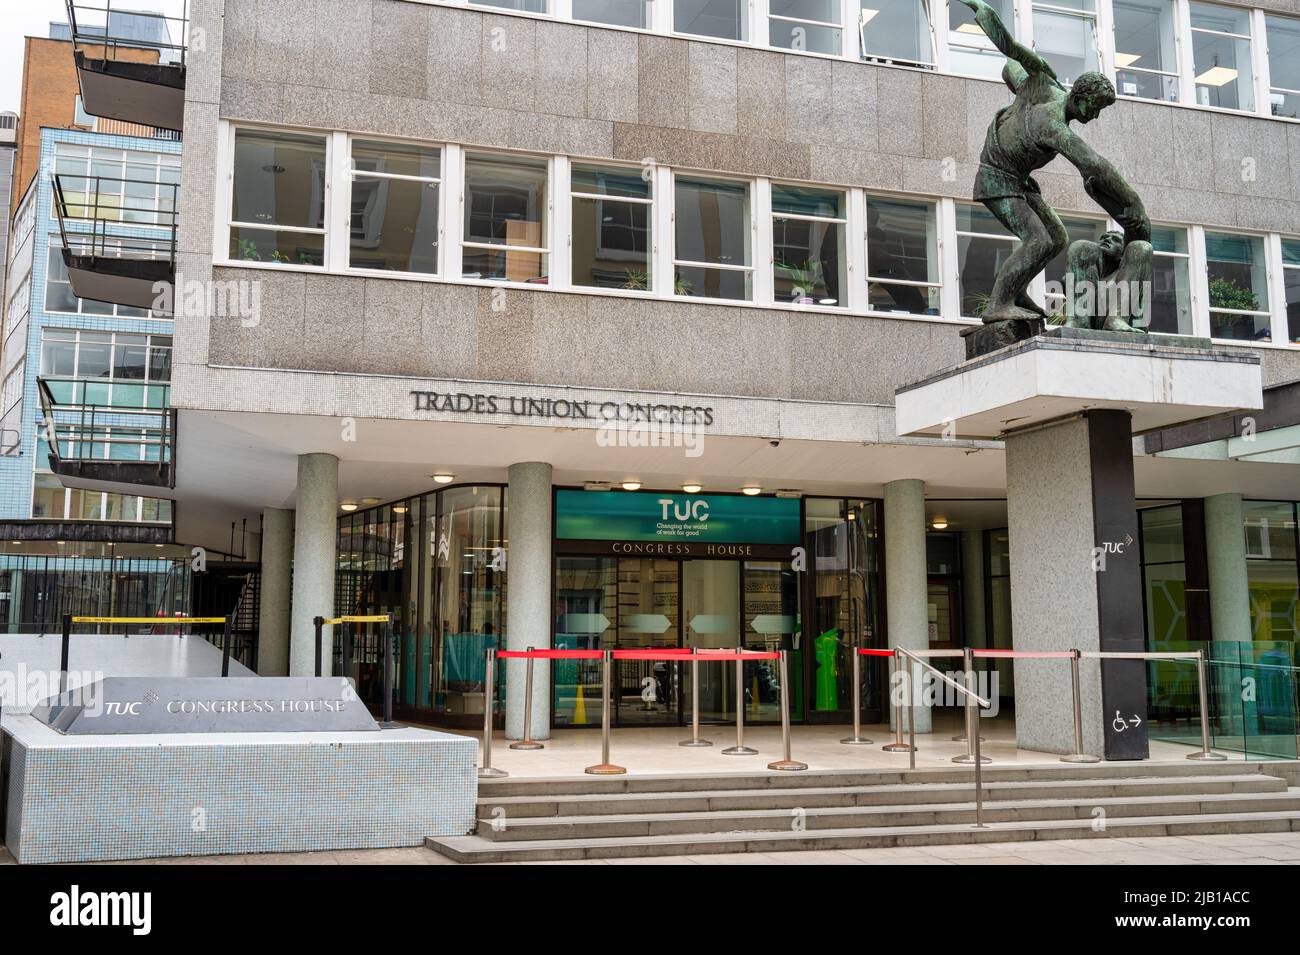 London, UK- May 3, 2022: The Trades Union Congress Building in London Stock Photo